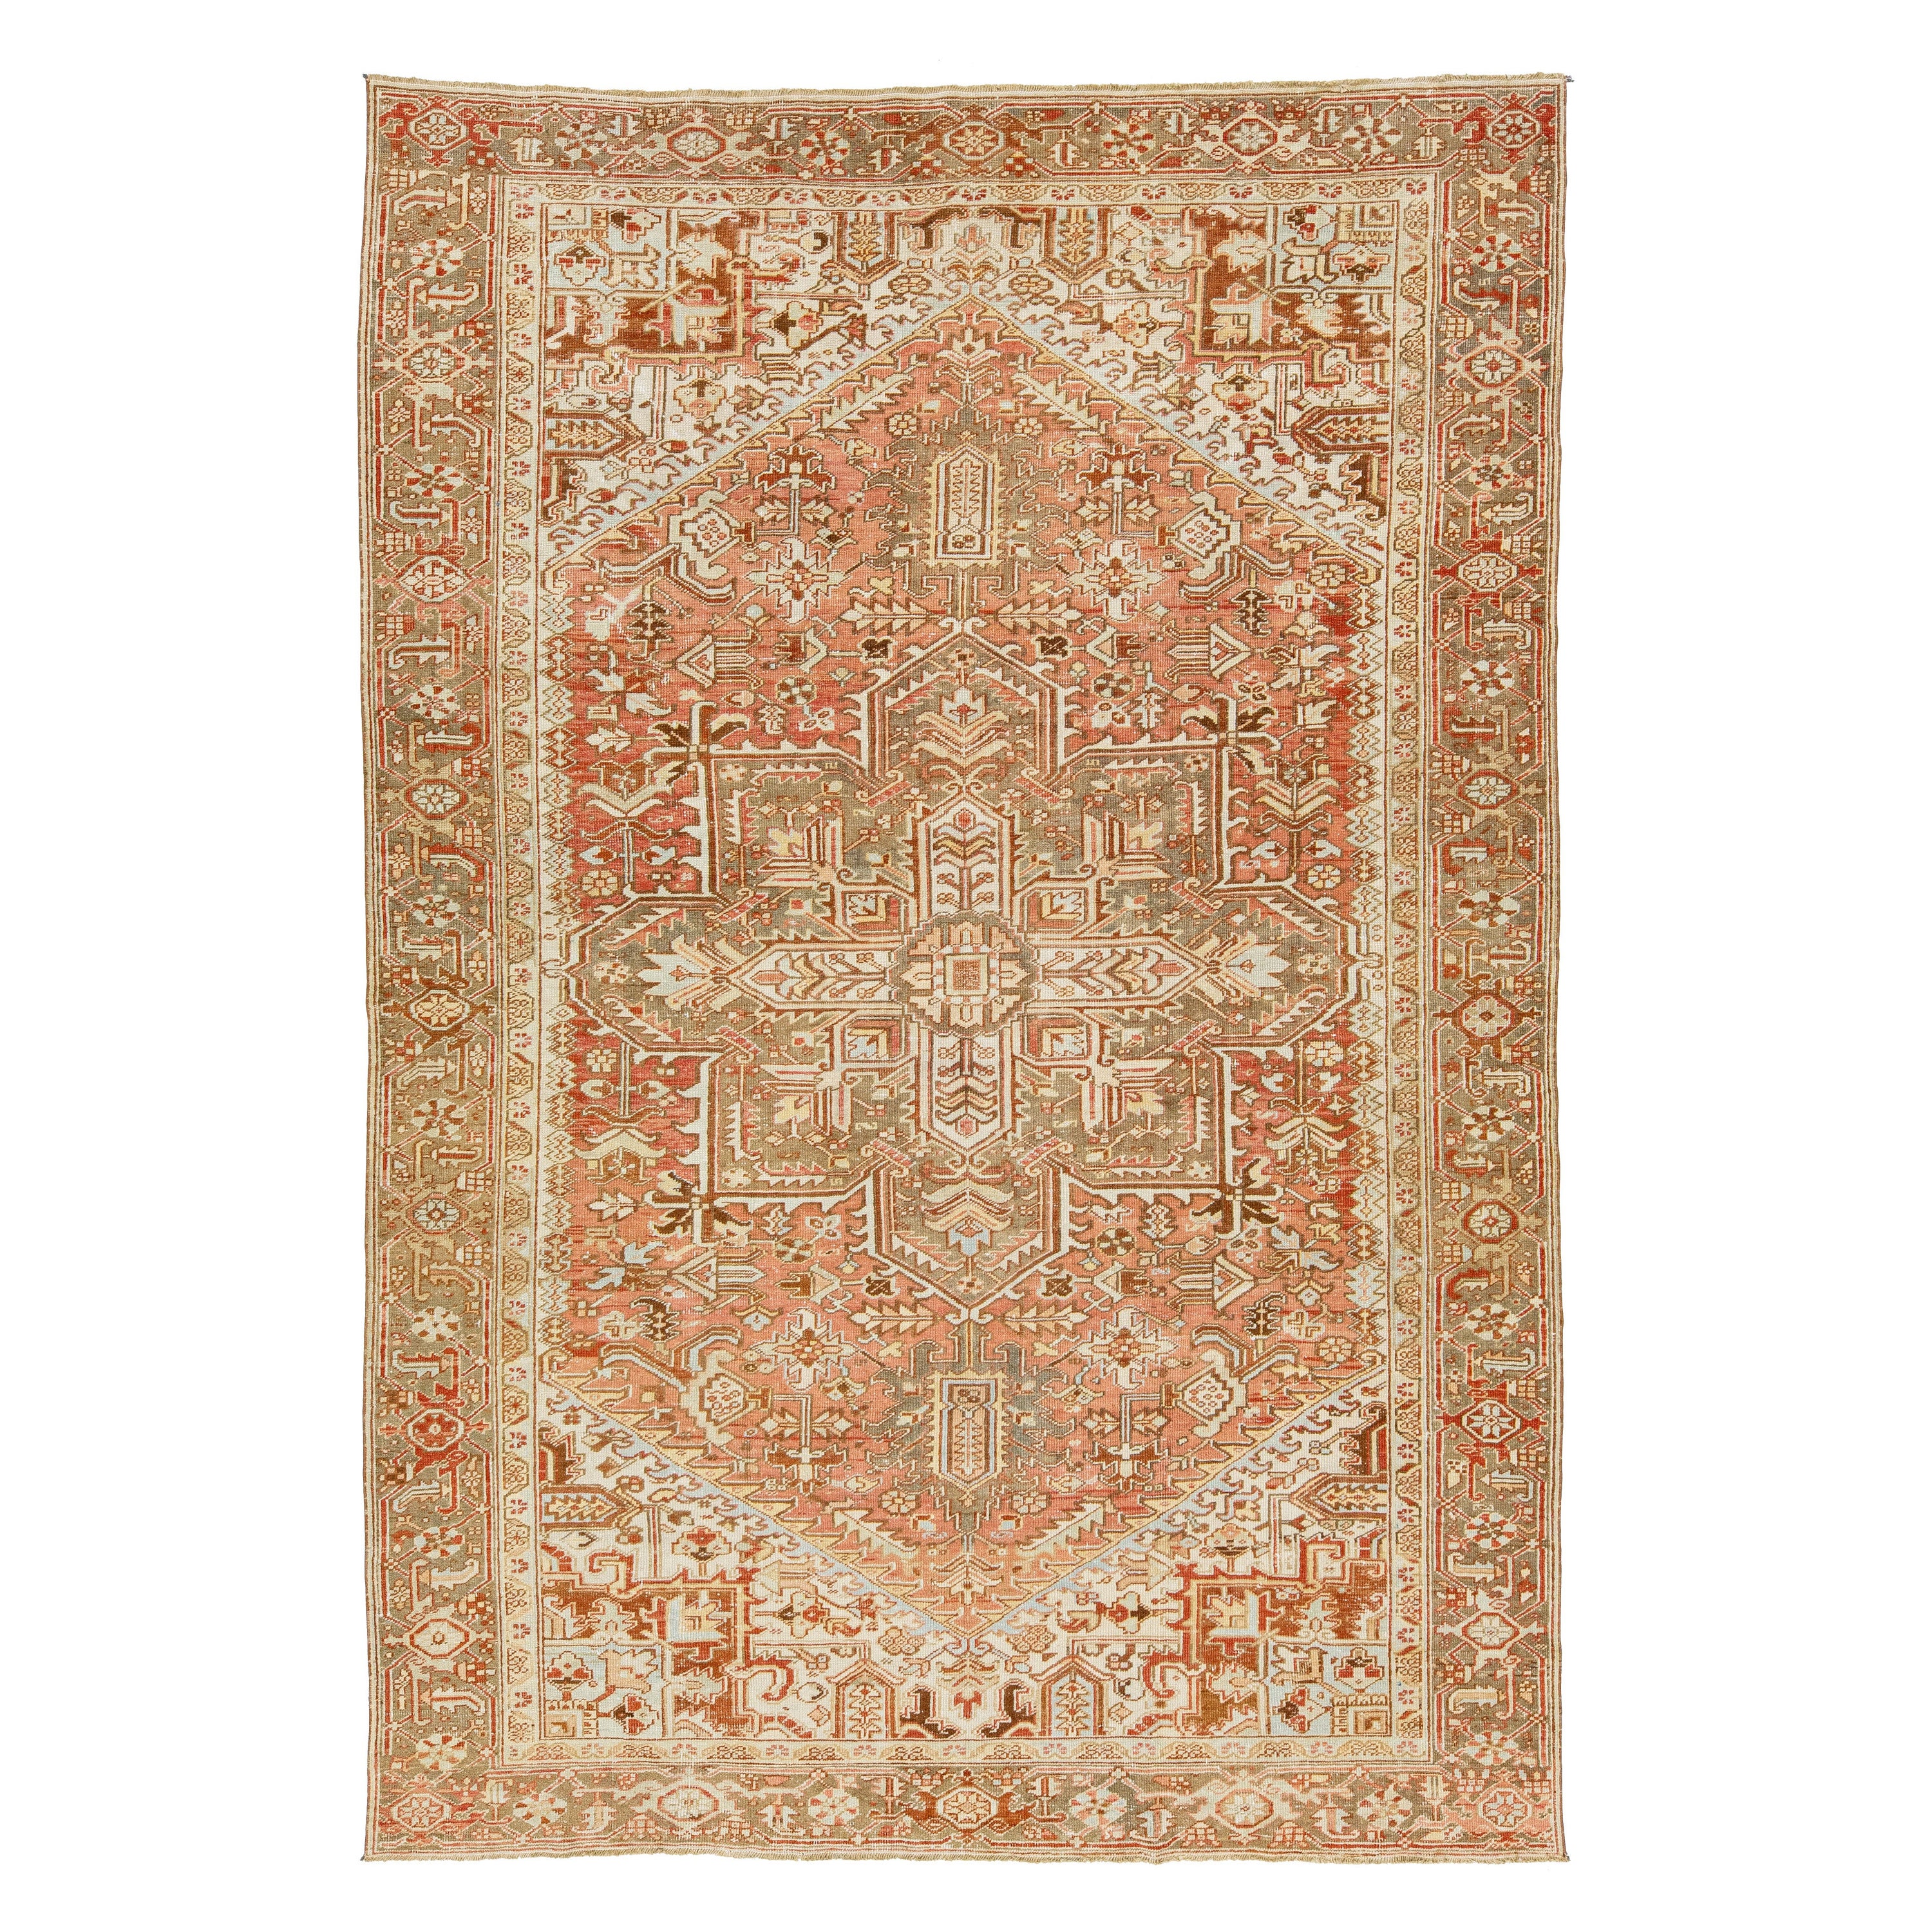 1920s Persian Heriz Antique Wool Rug In Rust Color Featuring a Medallion Motif For Sale